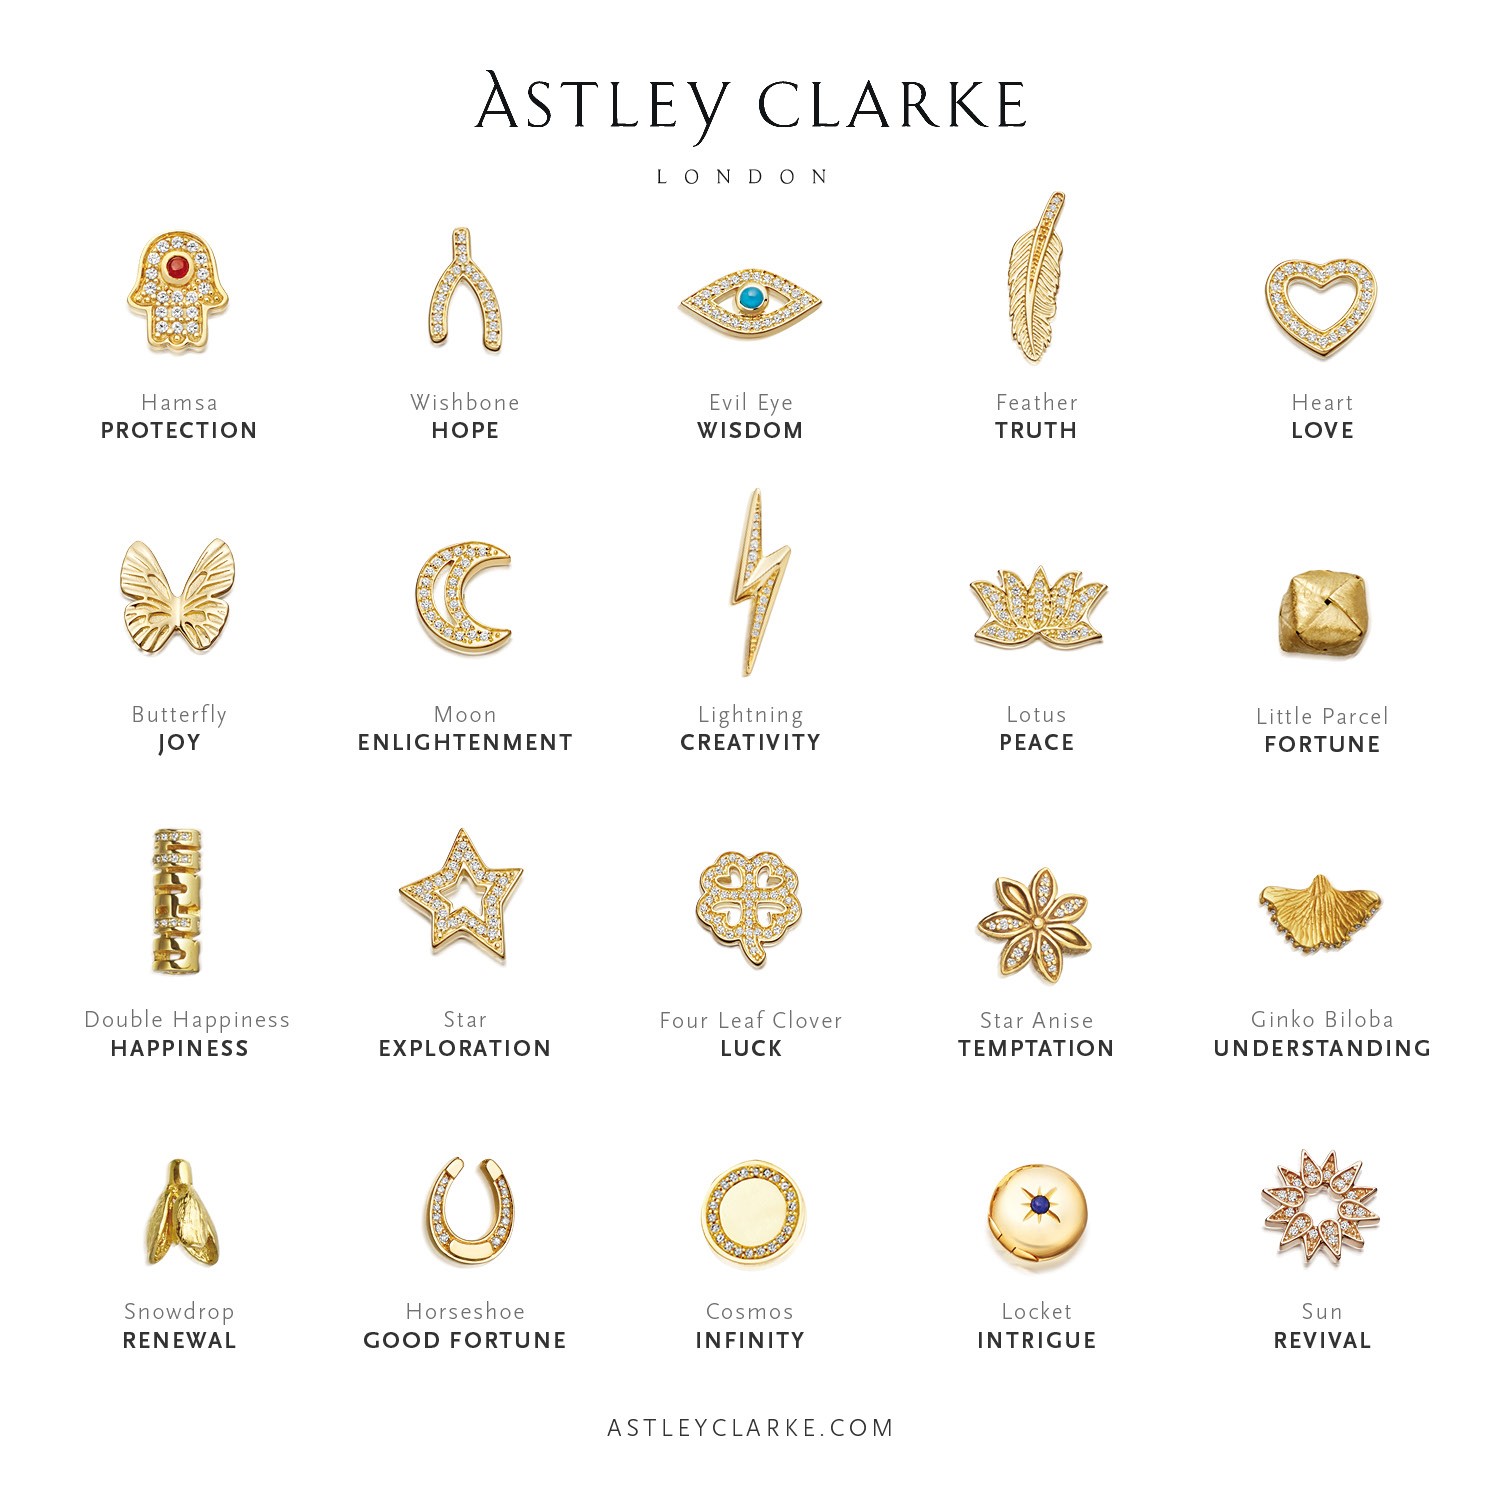 The various symbols that can be used on a friendship bracelet